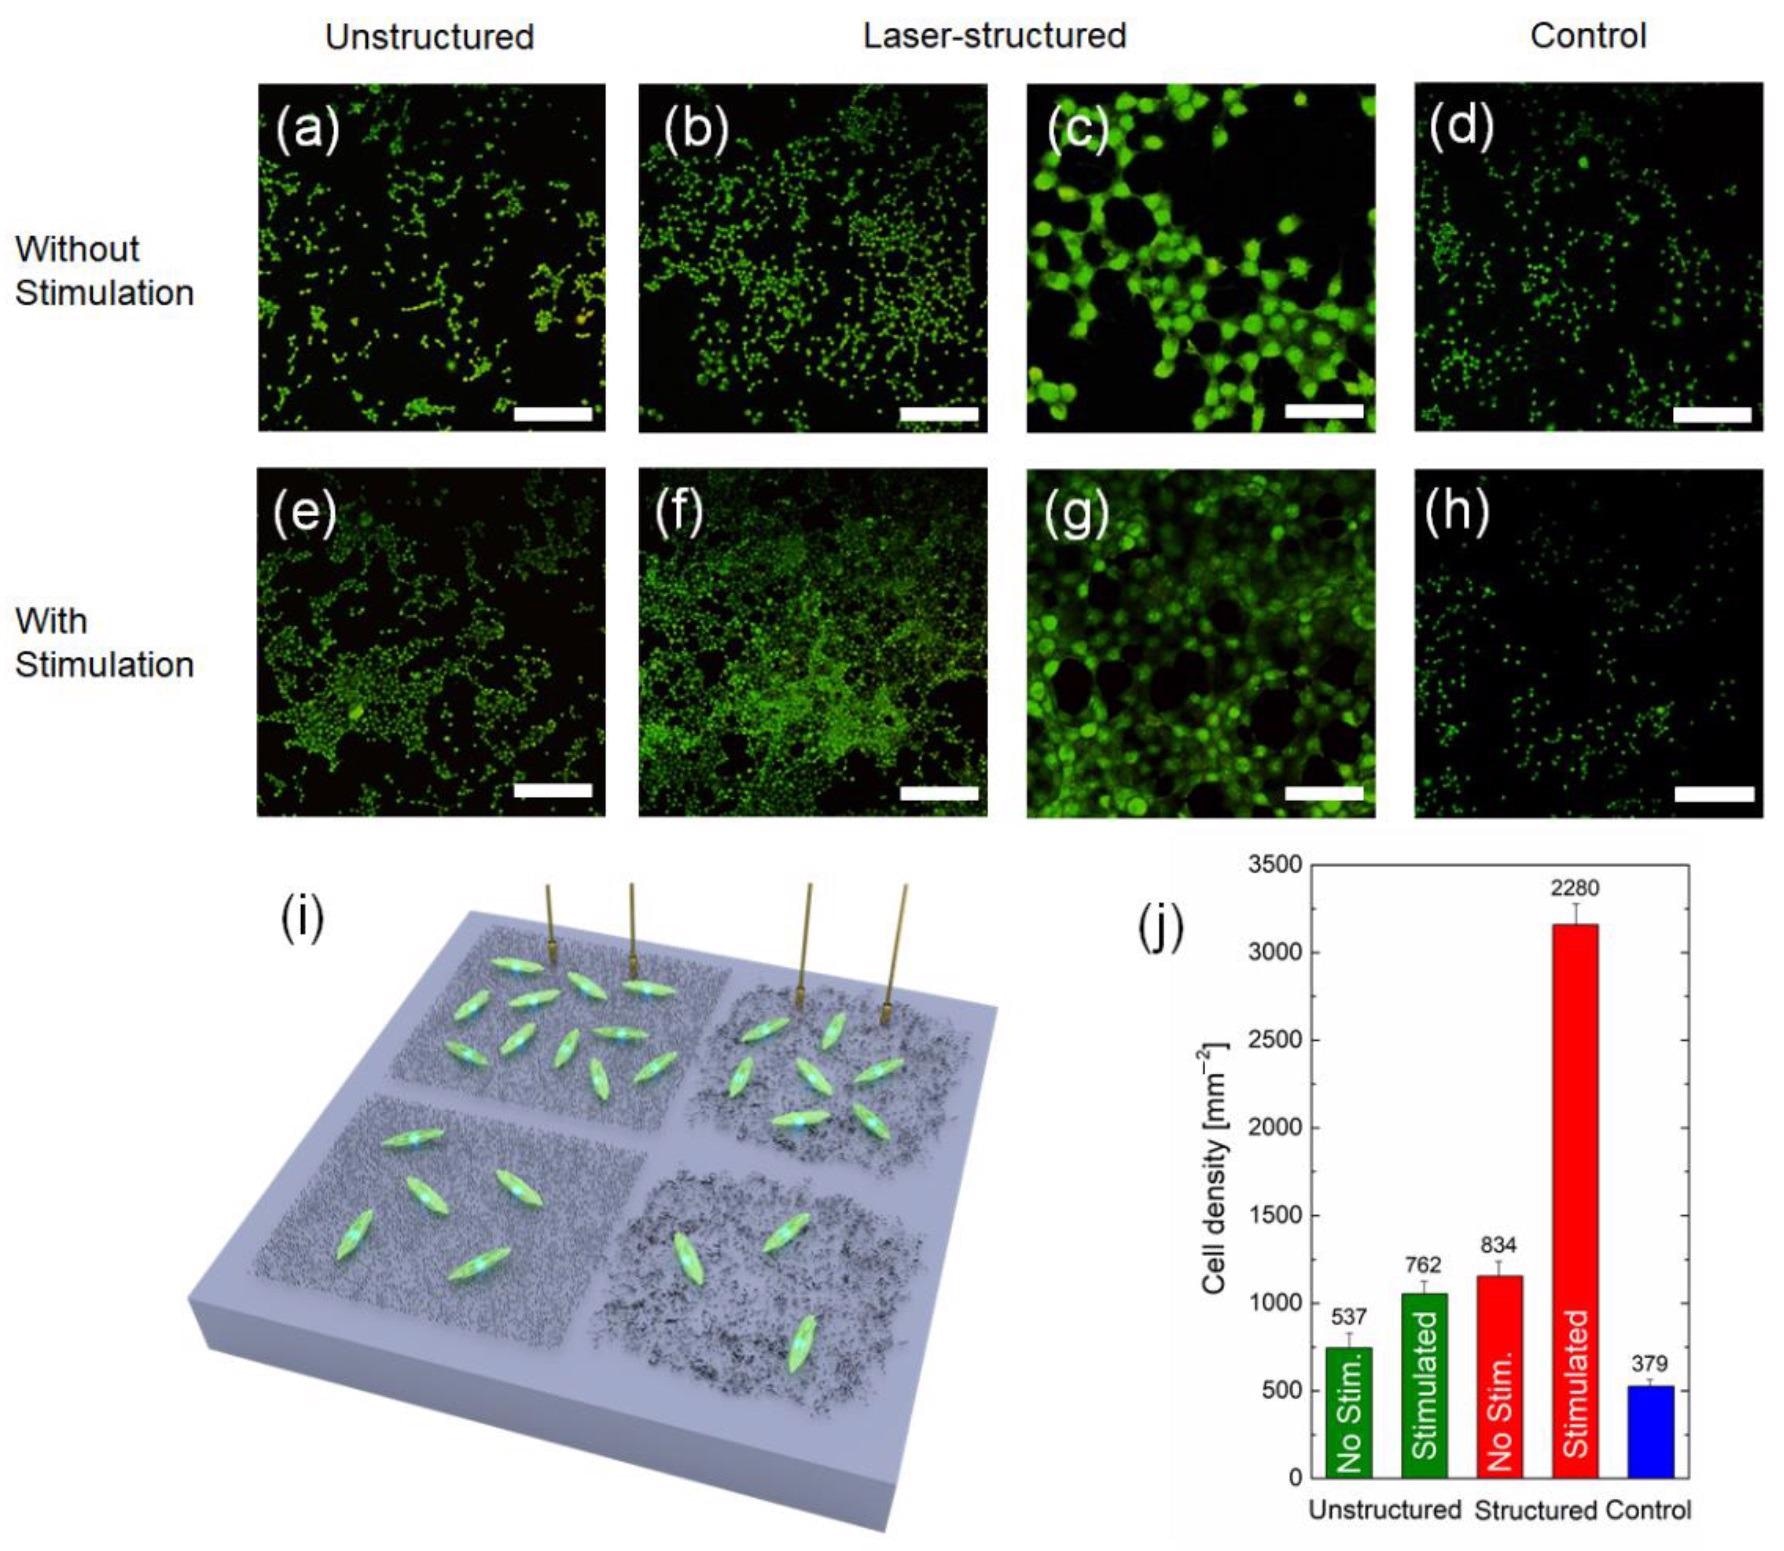 Examples of fluorescence microscope images of fibroblast cell cultures on Si substrates 24 h in vitro with unstructured (a,e) and laser-structured (b,c,f,g) MWCNT arrays with BSA immobilized with (e–g) and without (a–c) electrical stimulation and control samples (d,h). The scale bar for (a,b,d–f,h) is 200 µm, for (c,g) it is 50 µm. Schematic of fibroblasts grown on Si substrates with various conditions used in the experiment (i). The values on the bars in (j) represent the total number of live cells averaged over several areas of size 850 µm × 850 µm (0.7225 mm2). The results from three images on three different samples for each type of the condition were averaged for the statistics; n = 9.